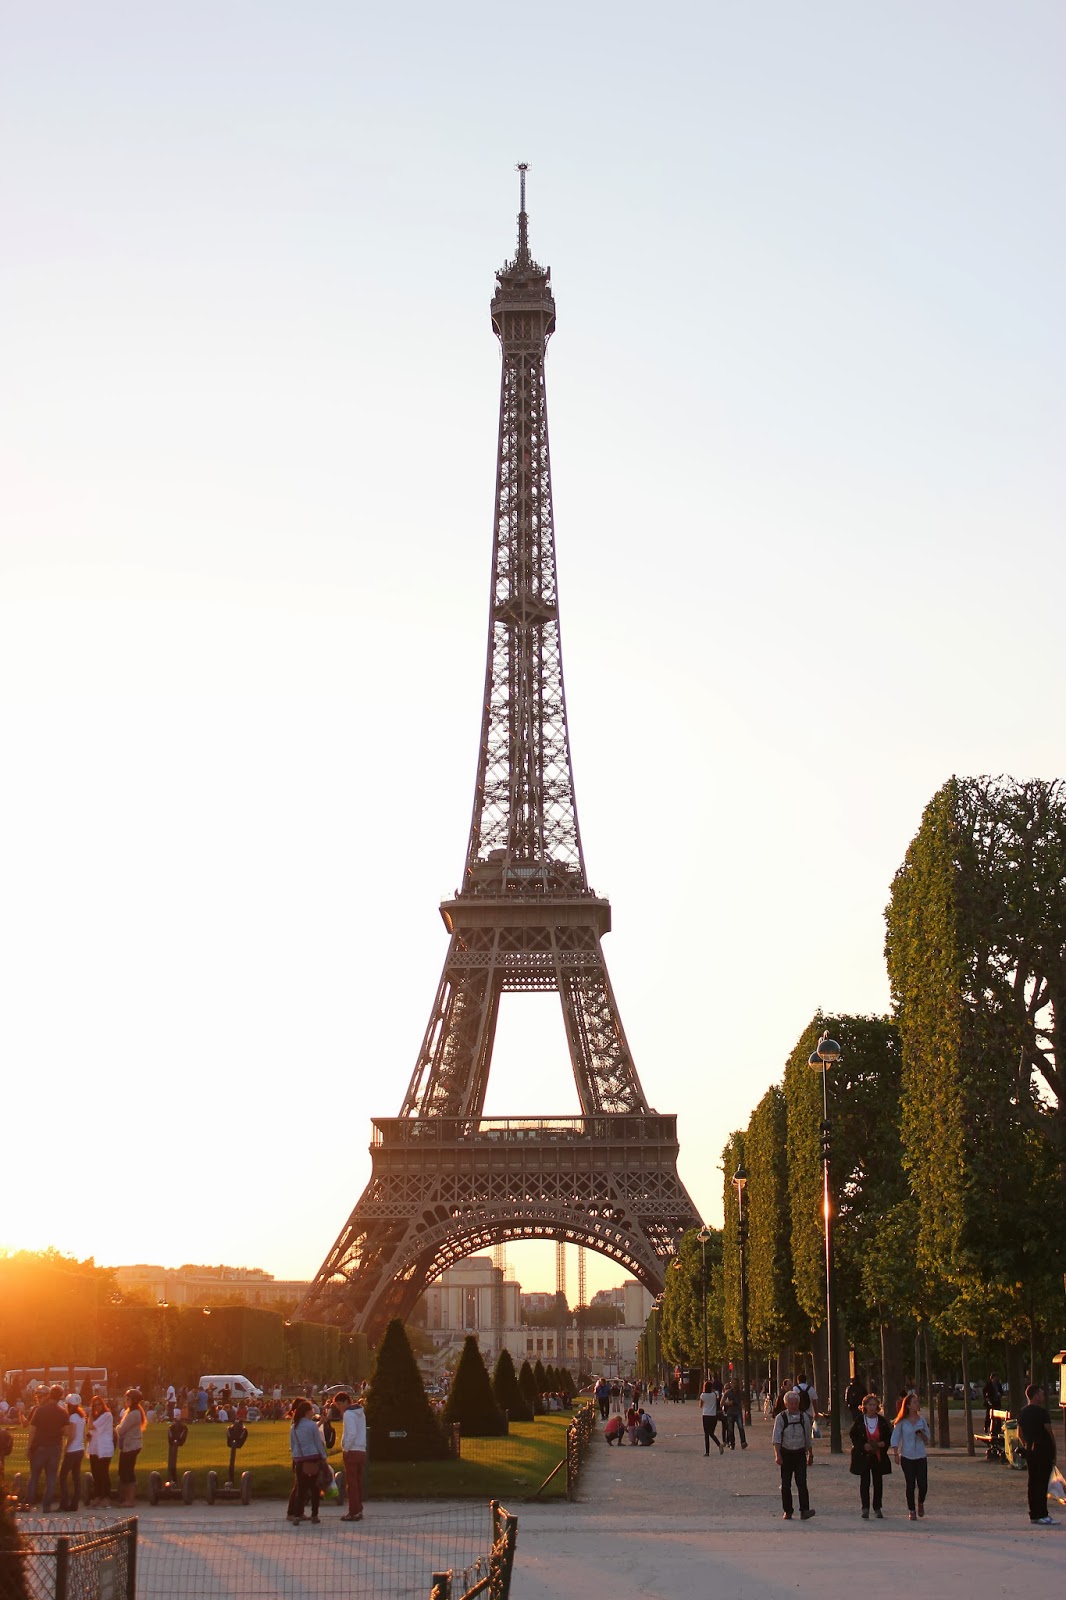 The sun setting behind the The Eiffel Tower. 